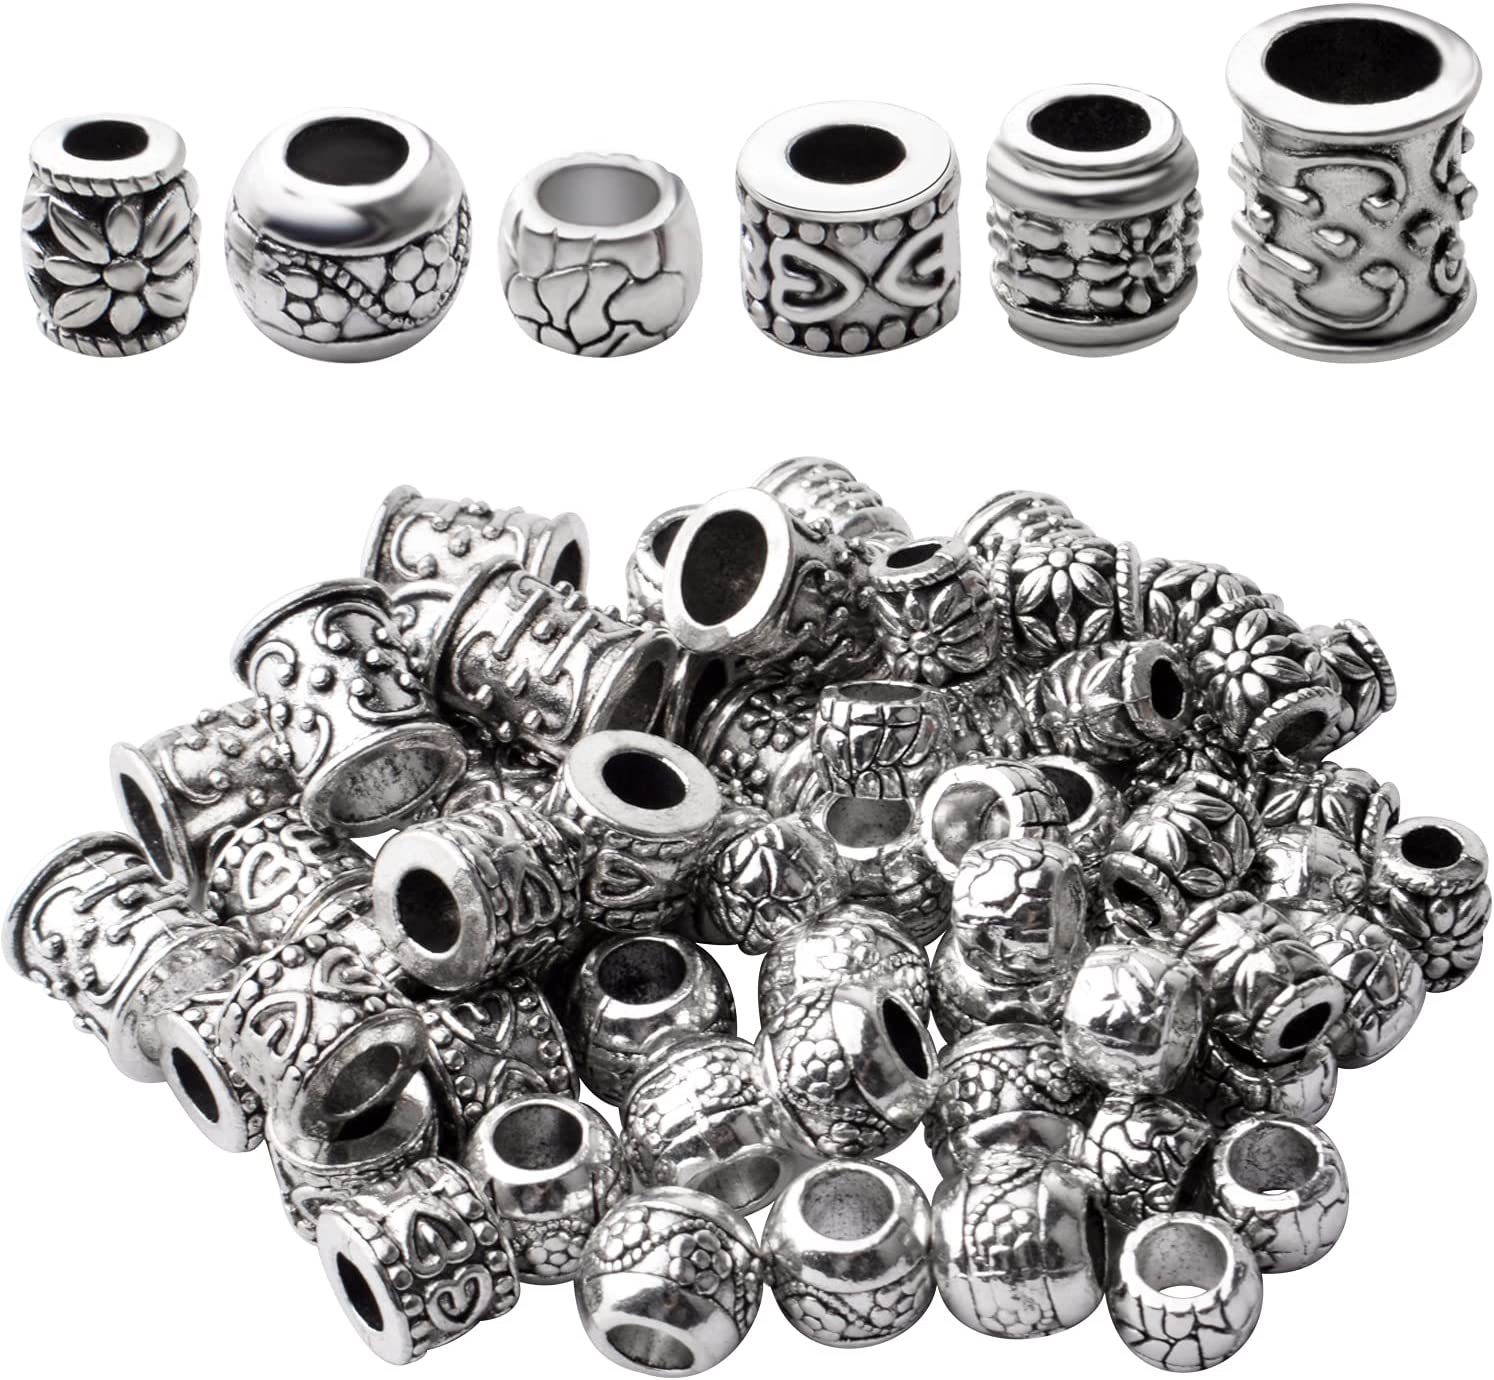 Large Hole Spacer Beads,100g Antique Silver Mixed Styles Tube Bead Spacers Tibetan Alloy Column Barrel Round Spacers Loose Beads for DIY Jewelry Bracelet Crafts Making Supplies